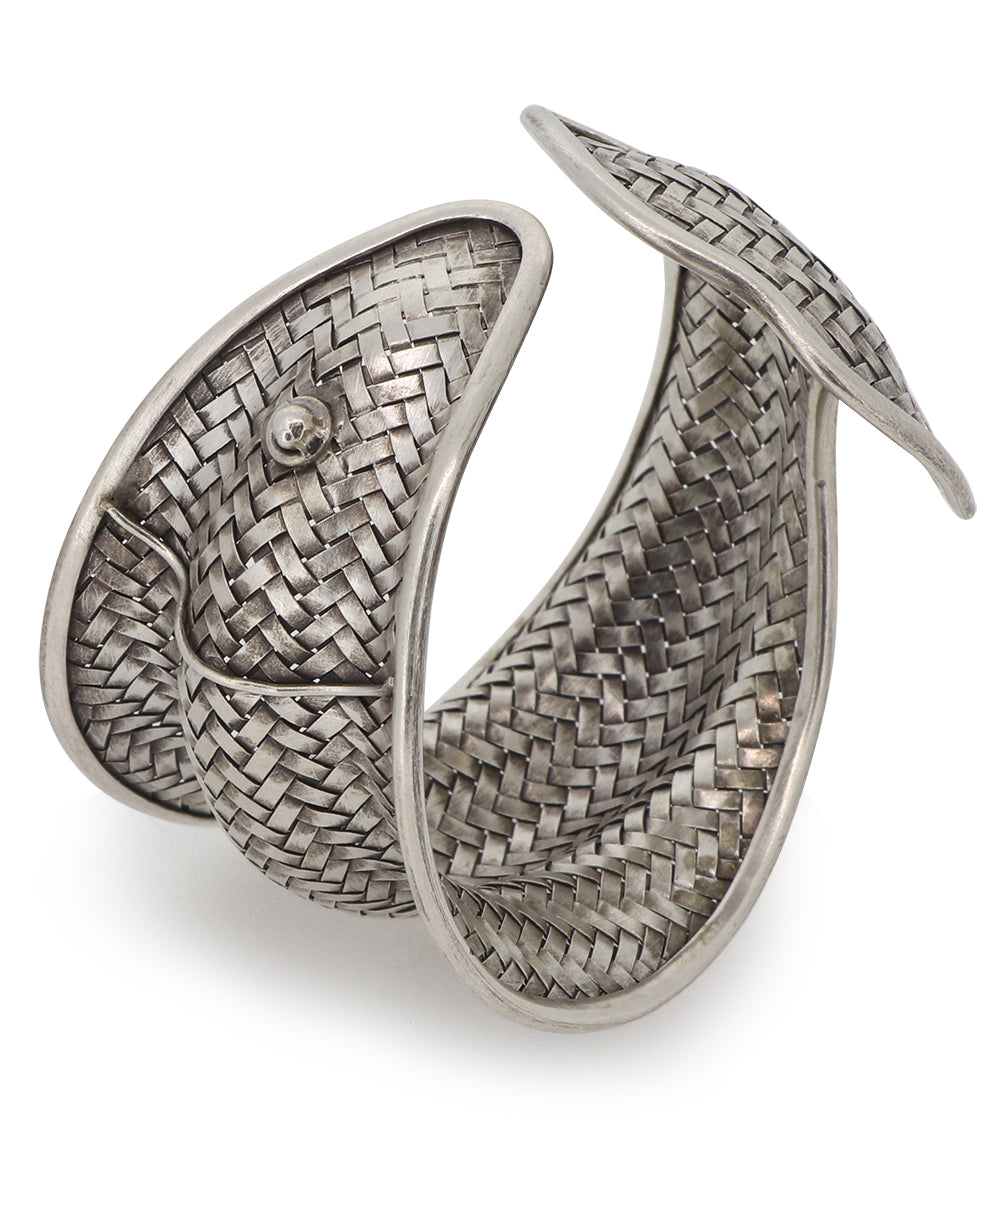 Laotian hill tribe silver adjustable cuff bracelet with fish design and weave texture